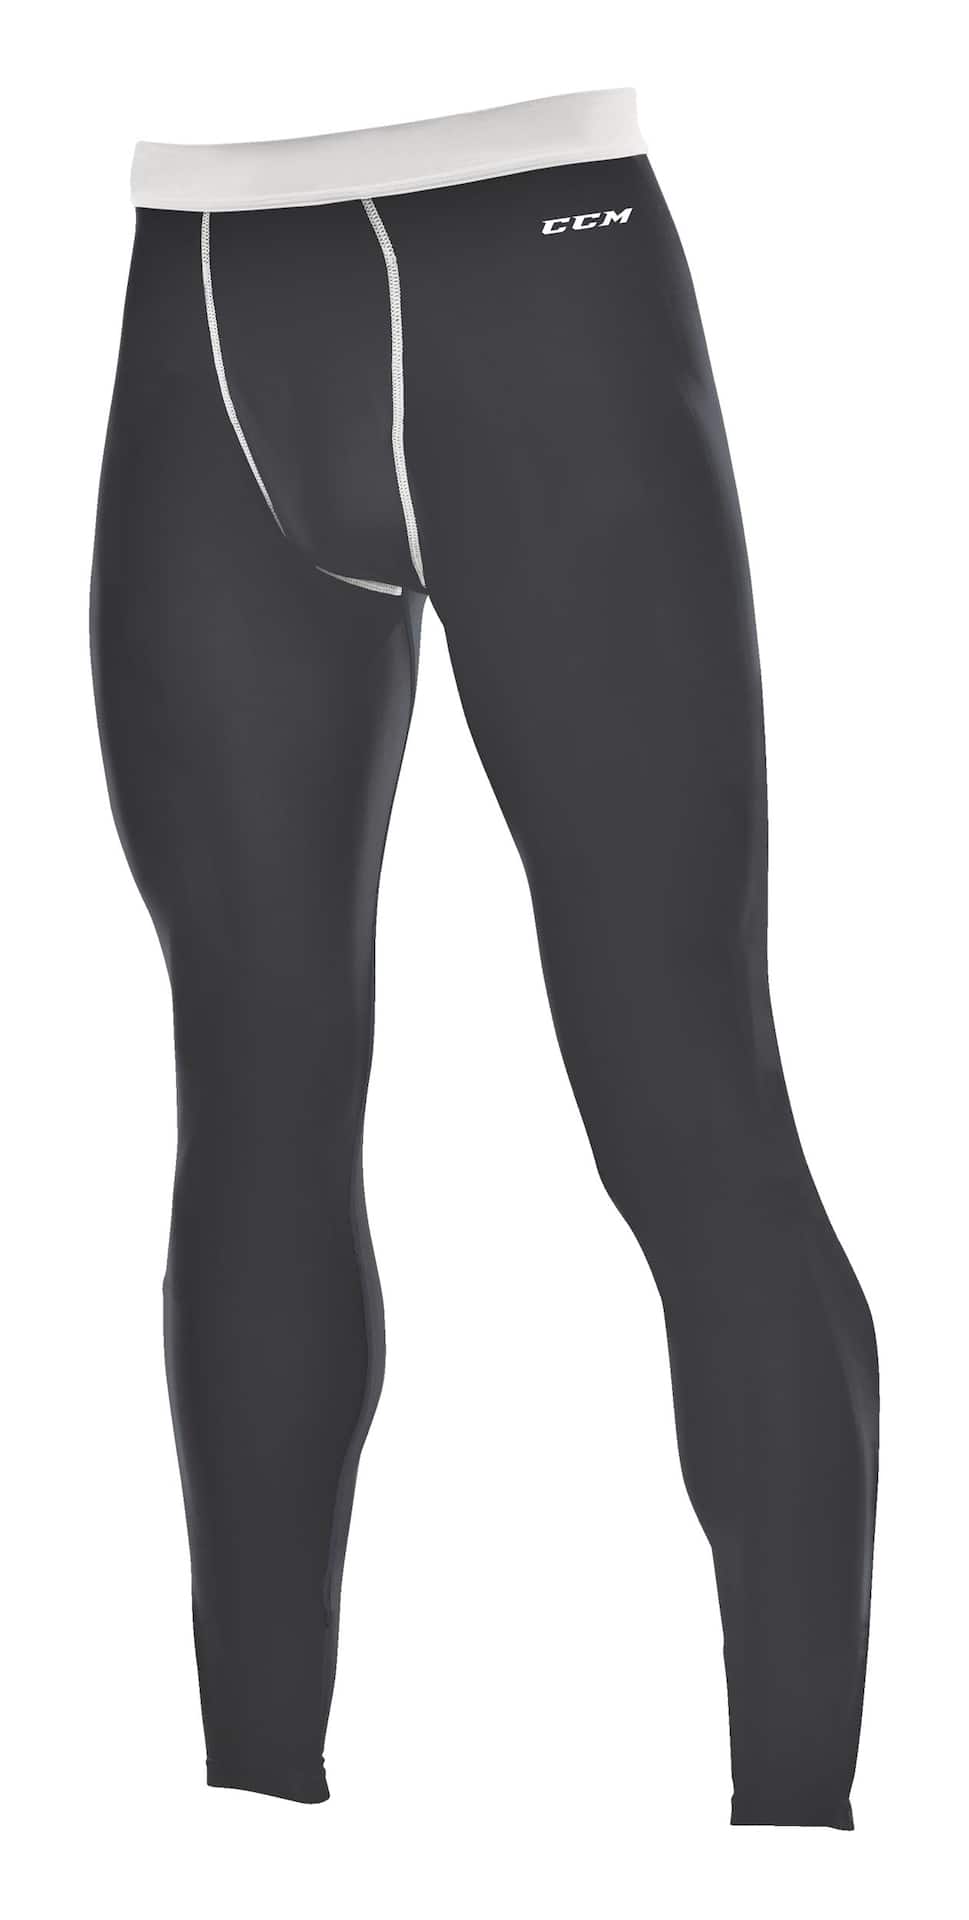 Under Armour Womens ColdGear Compression Mock Black Medium ** You can get  additional details at the image link.